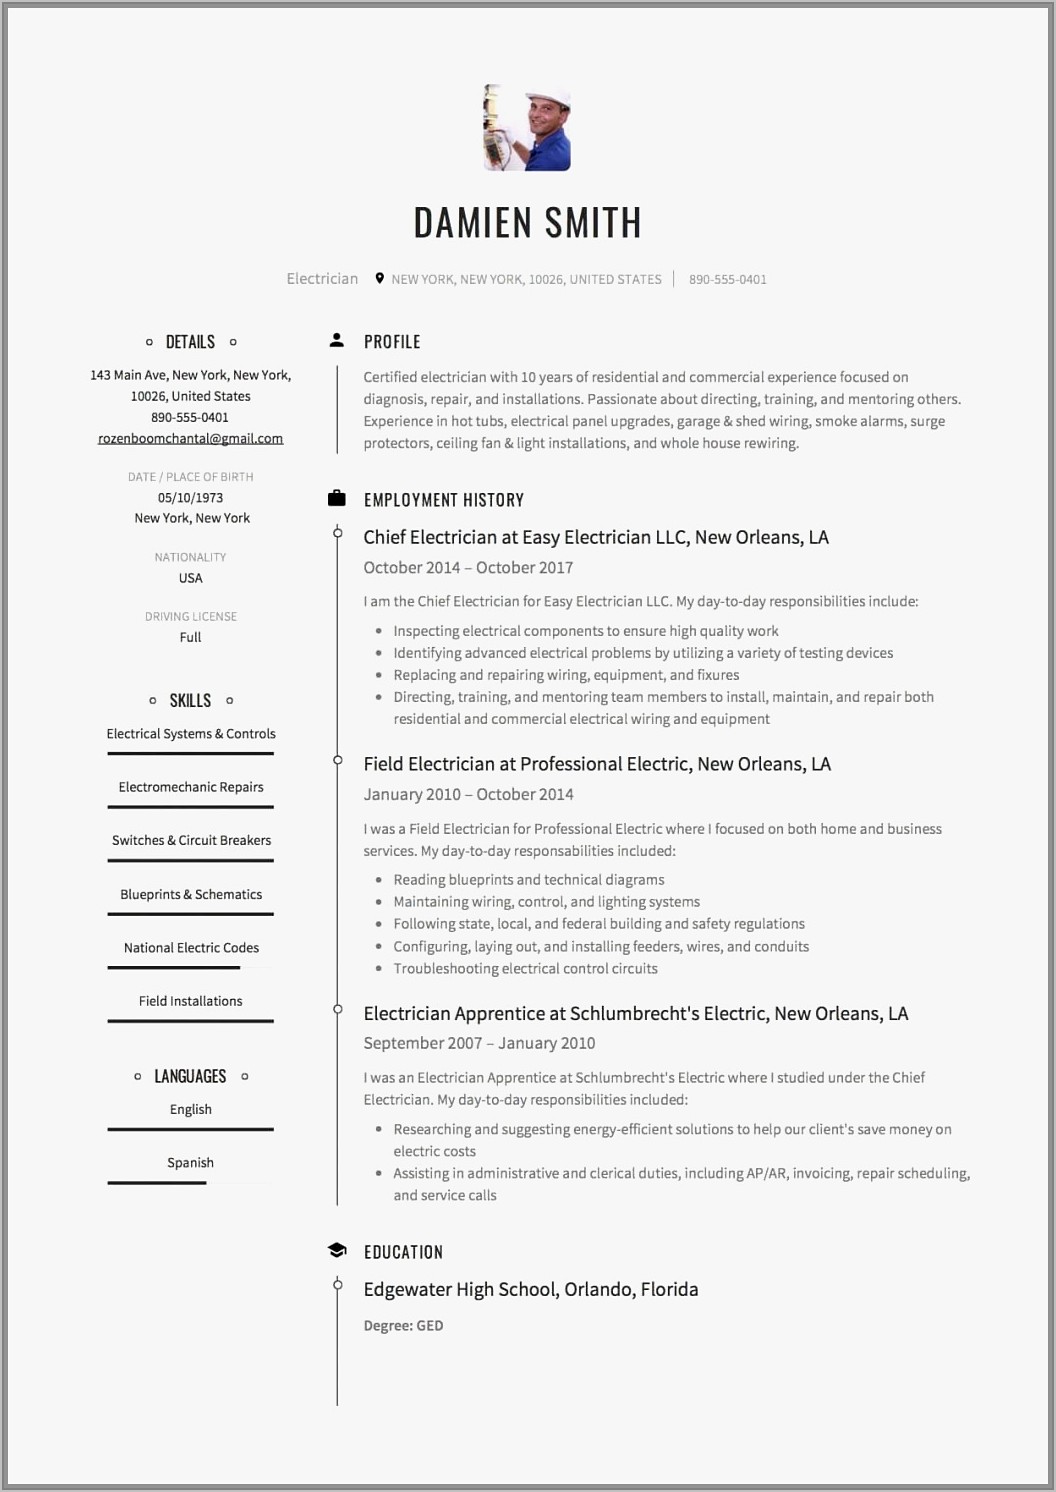 Resume Samples For Electricians